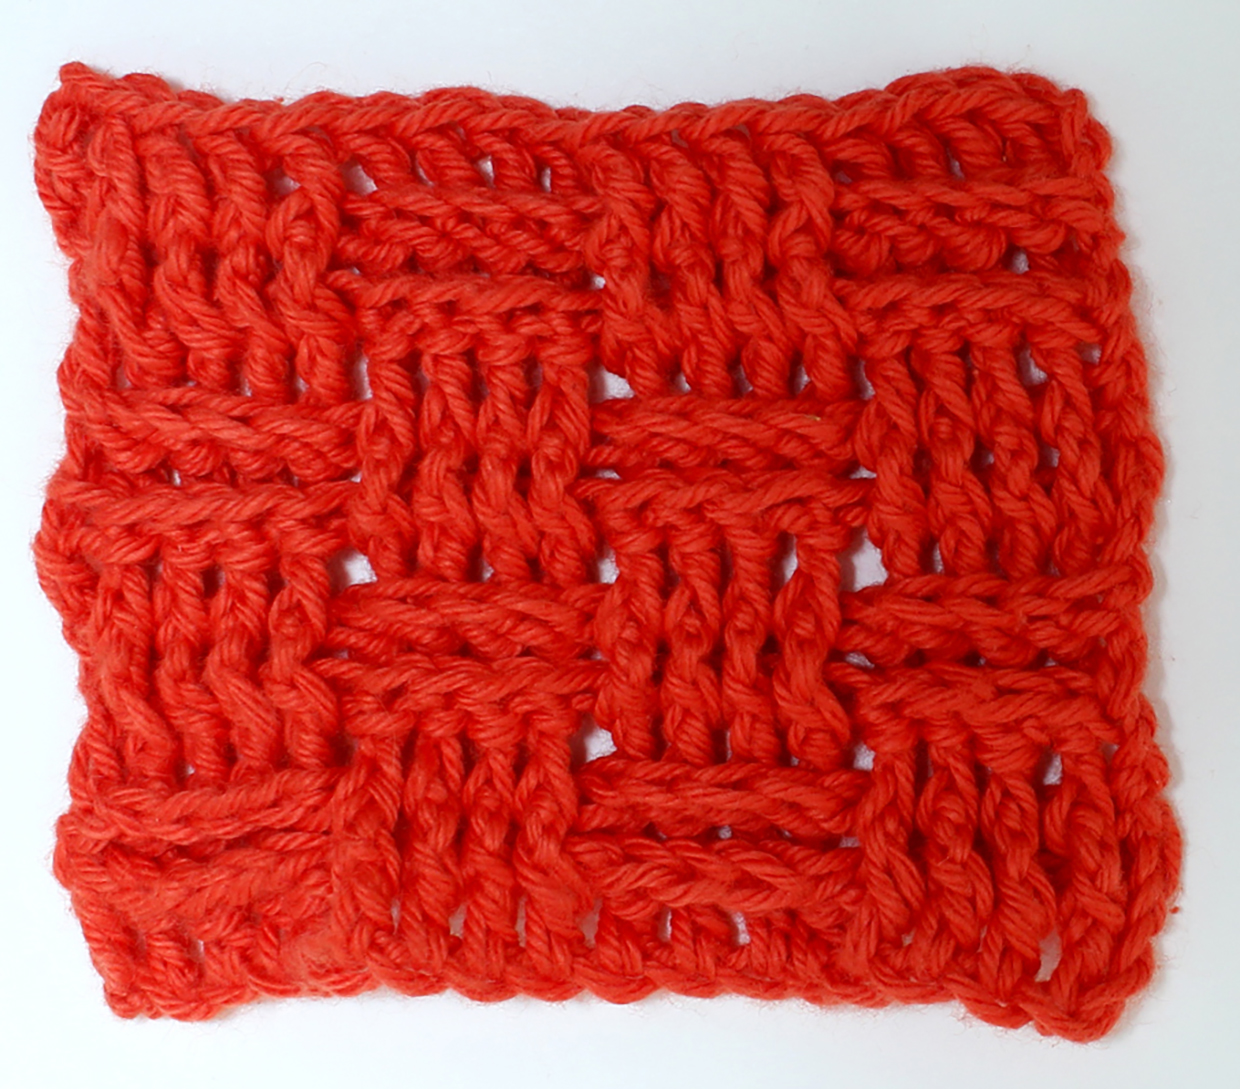 How_to_crochet_basketweave_stitch_step_33